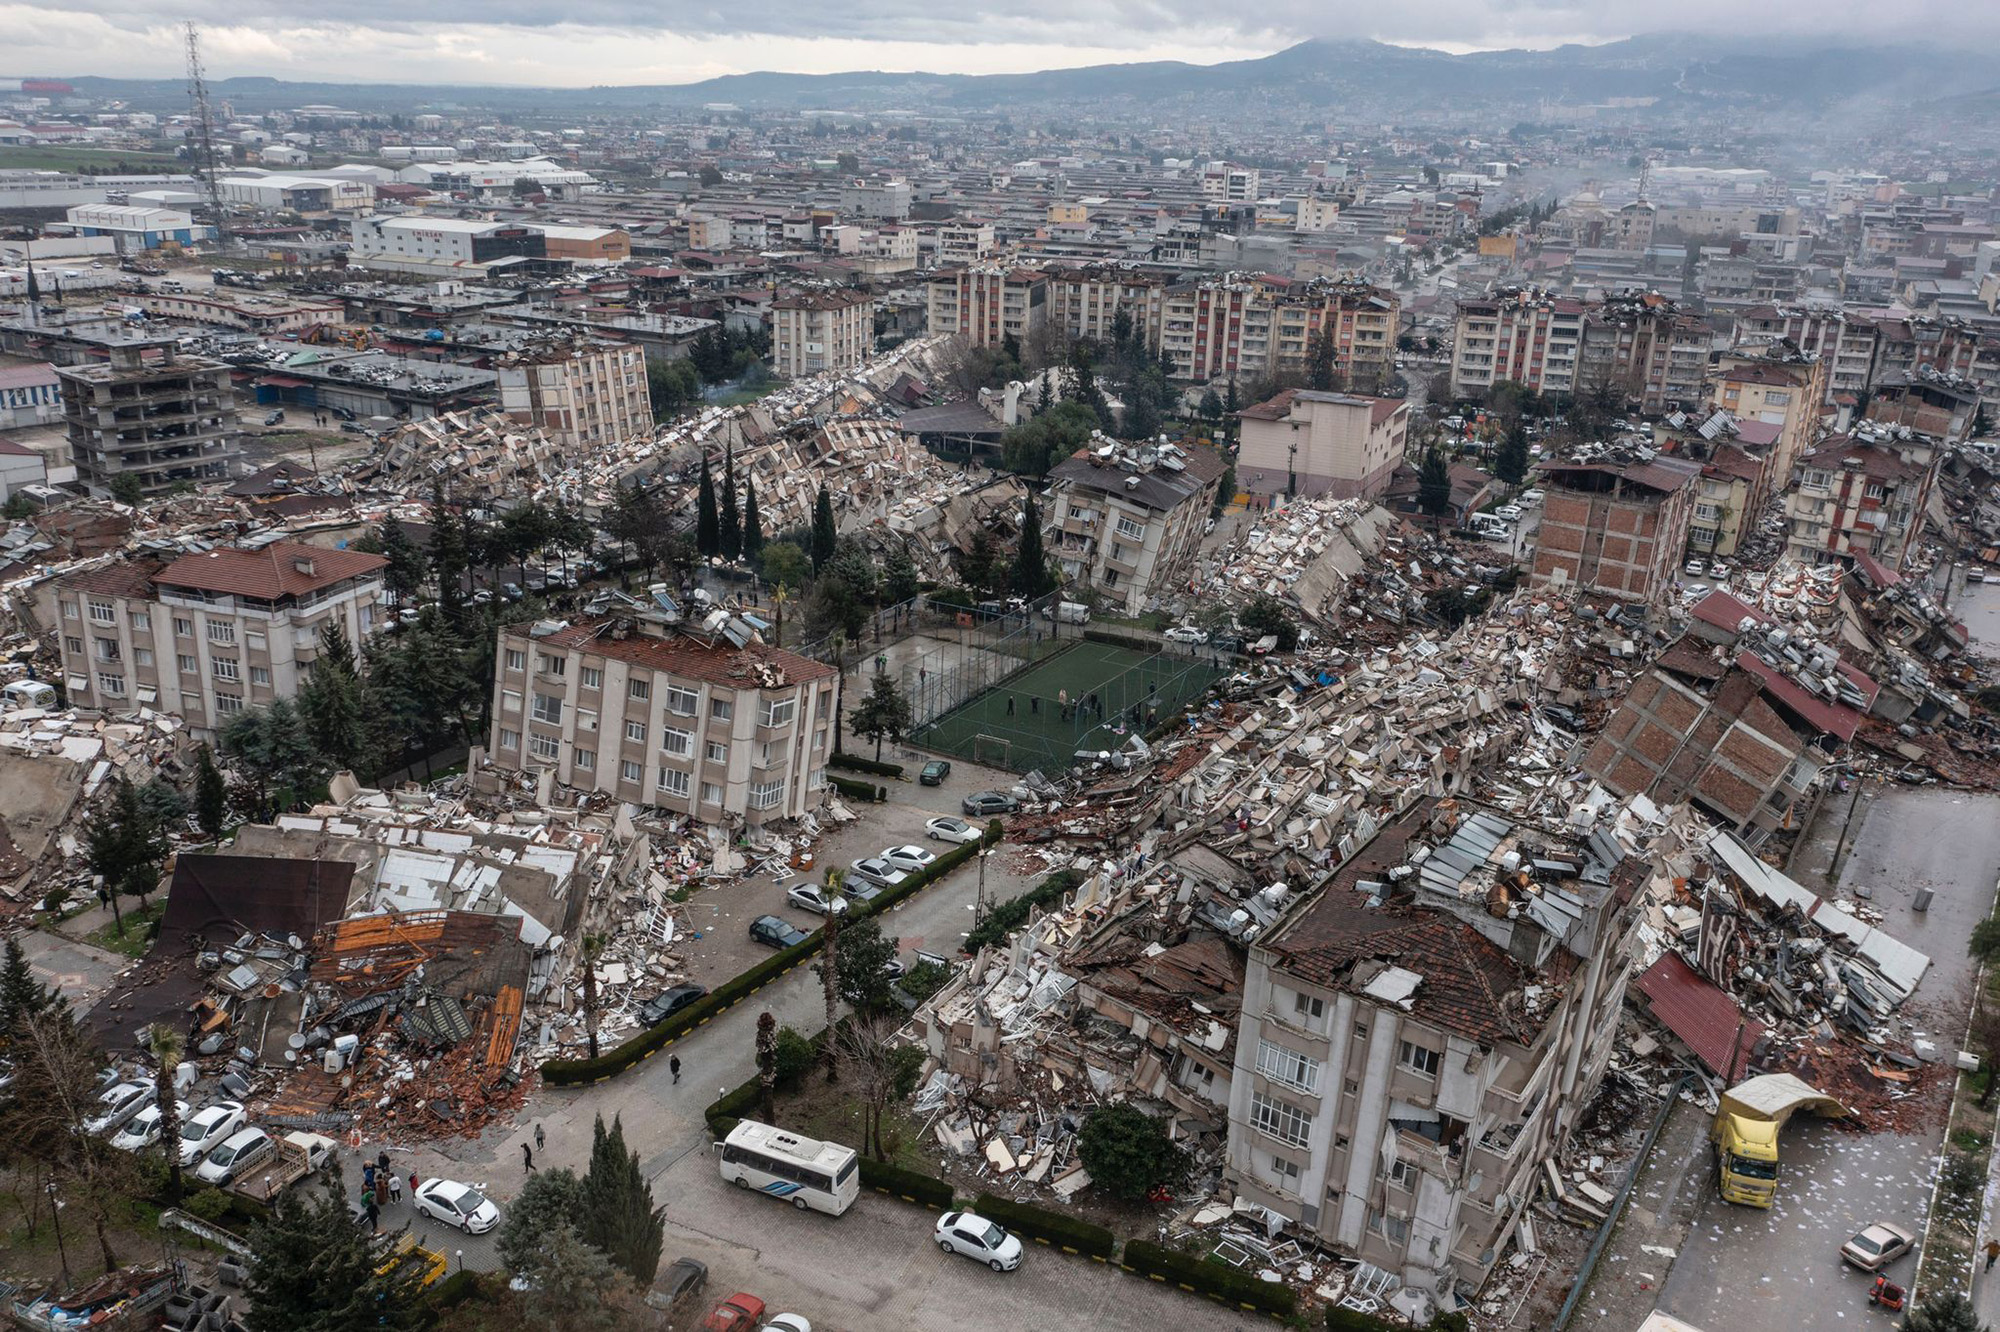 An aerial view over Hatay, Turkey, on February 6, showing the devastation caused by the earthquake.